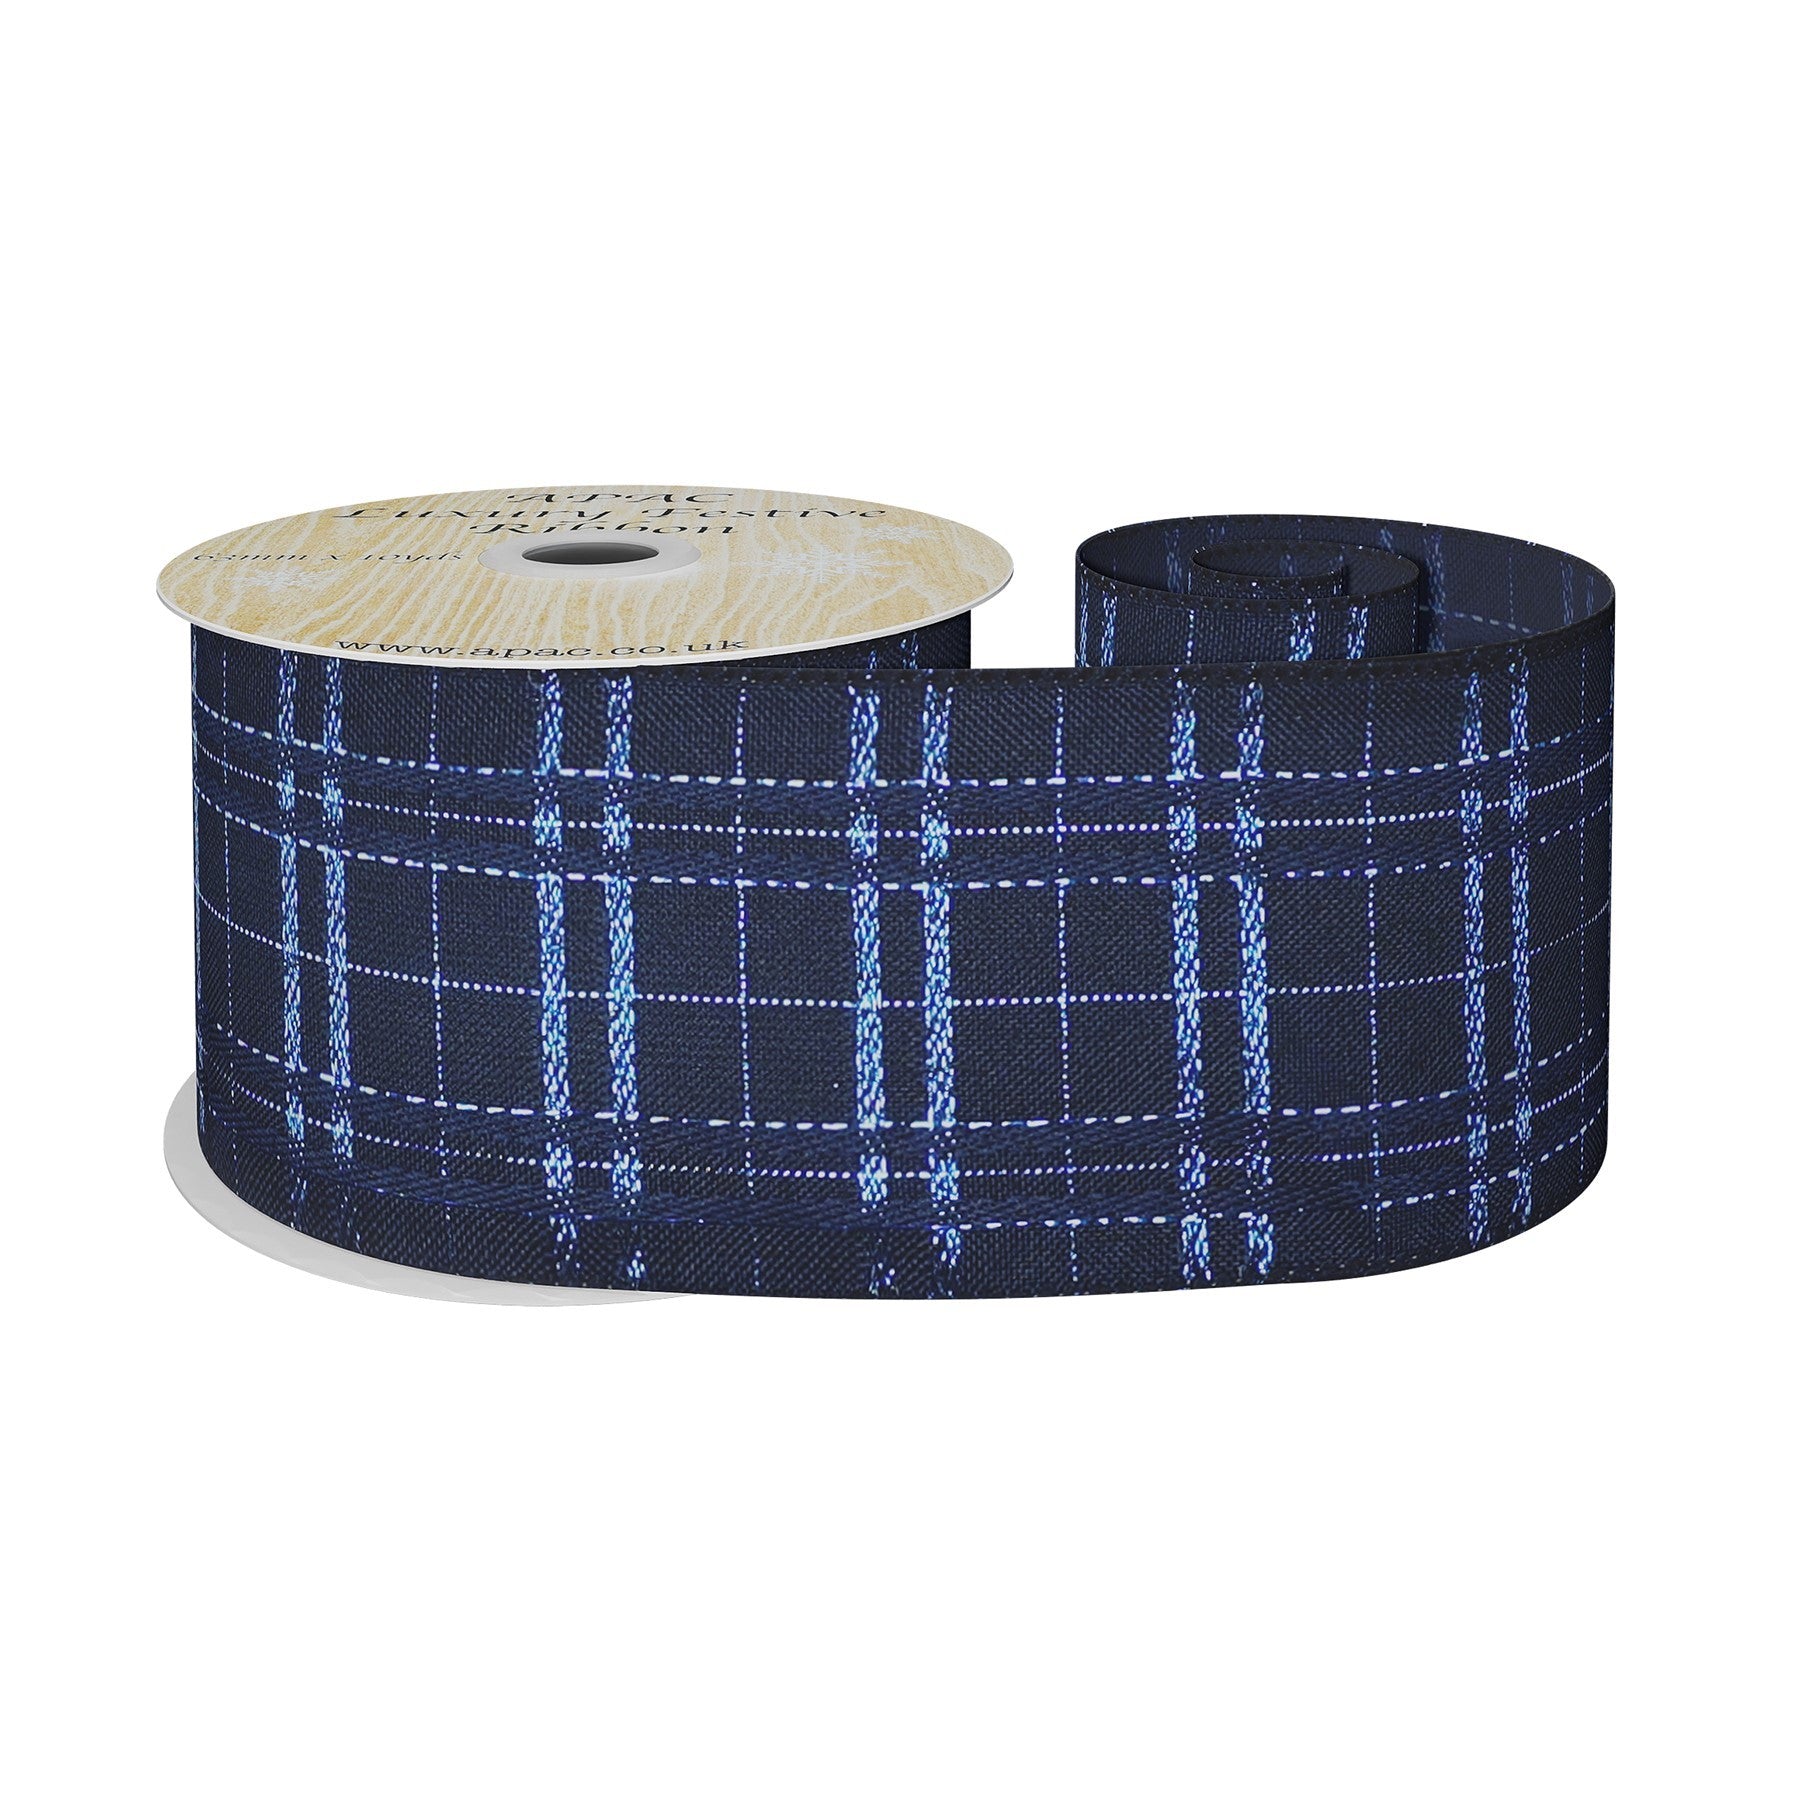 View Navy Wired Ribbon with Metallic Check Details 63mm x 10 yards information